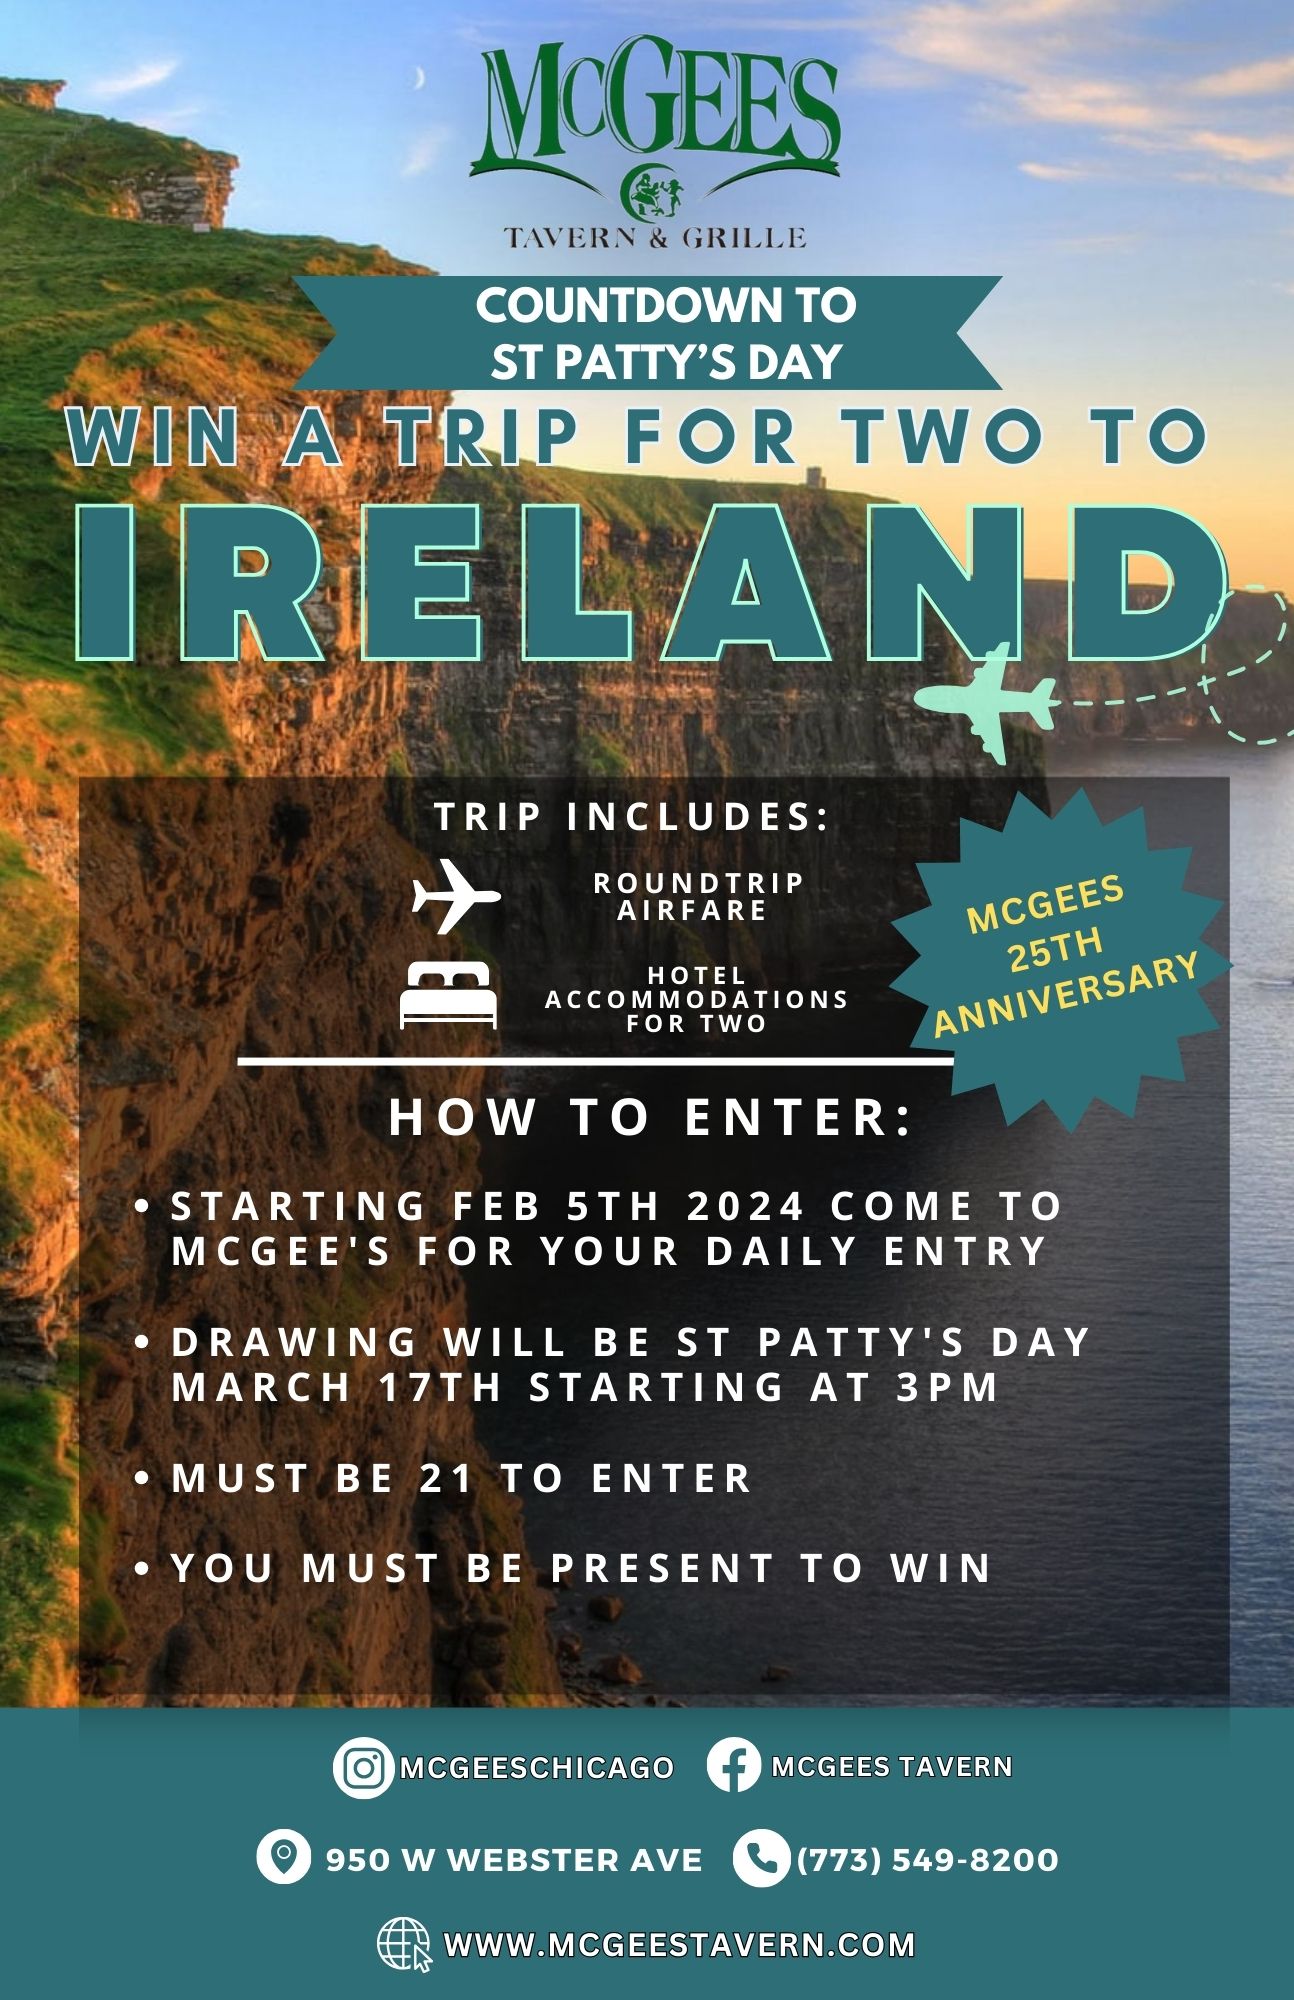 Win a Trip For Two to Ireland - McGee's Tavern